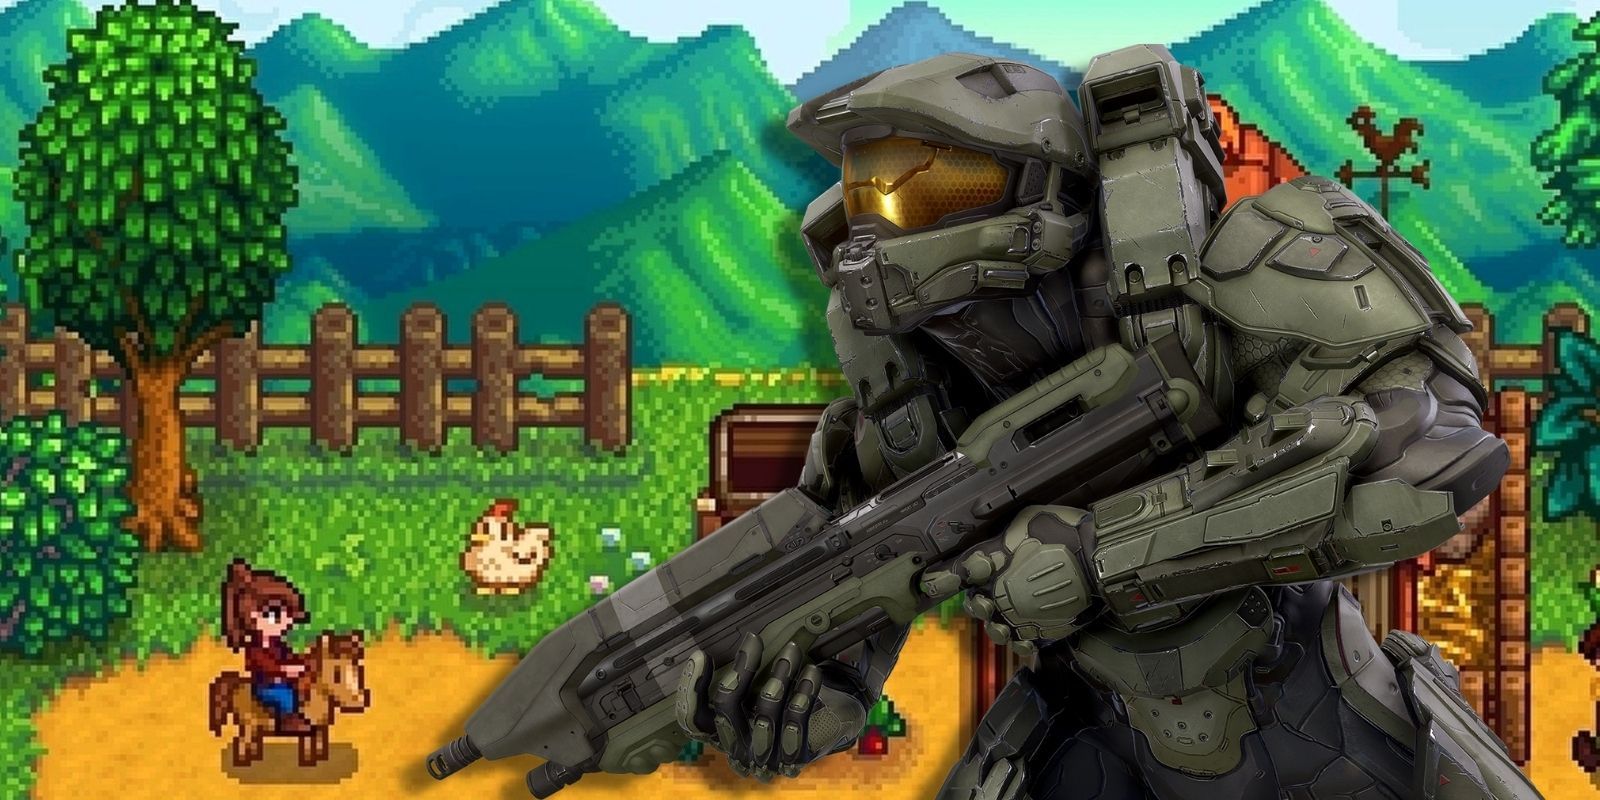 Master Chief juxtaposed on a Stardew Valley farm